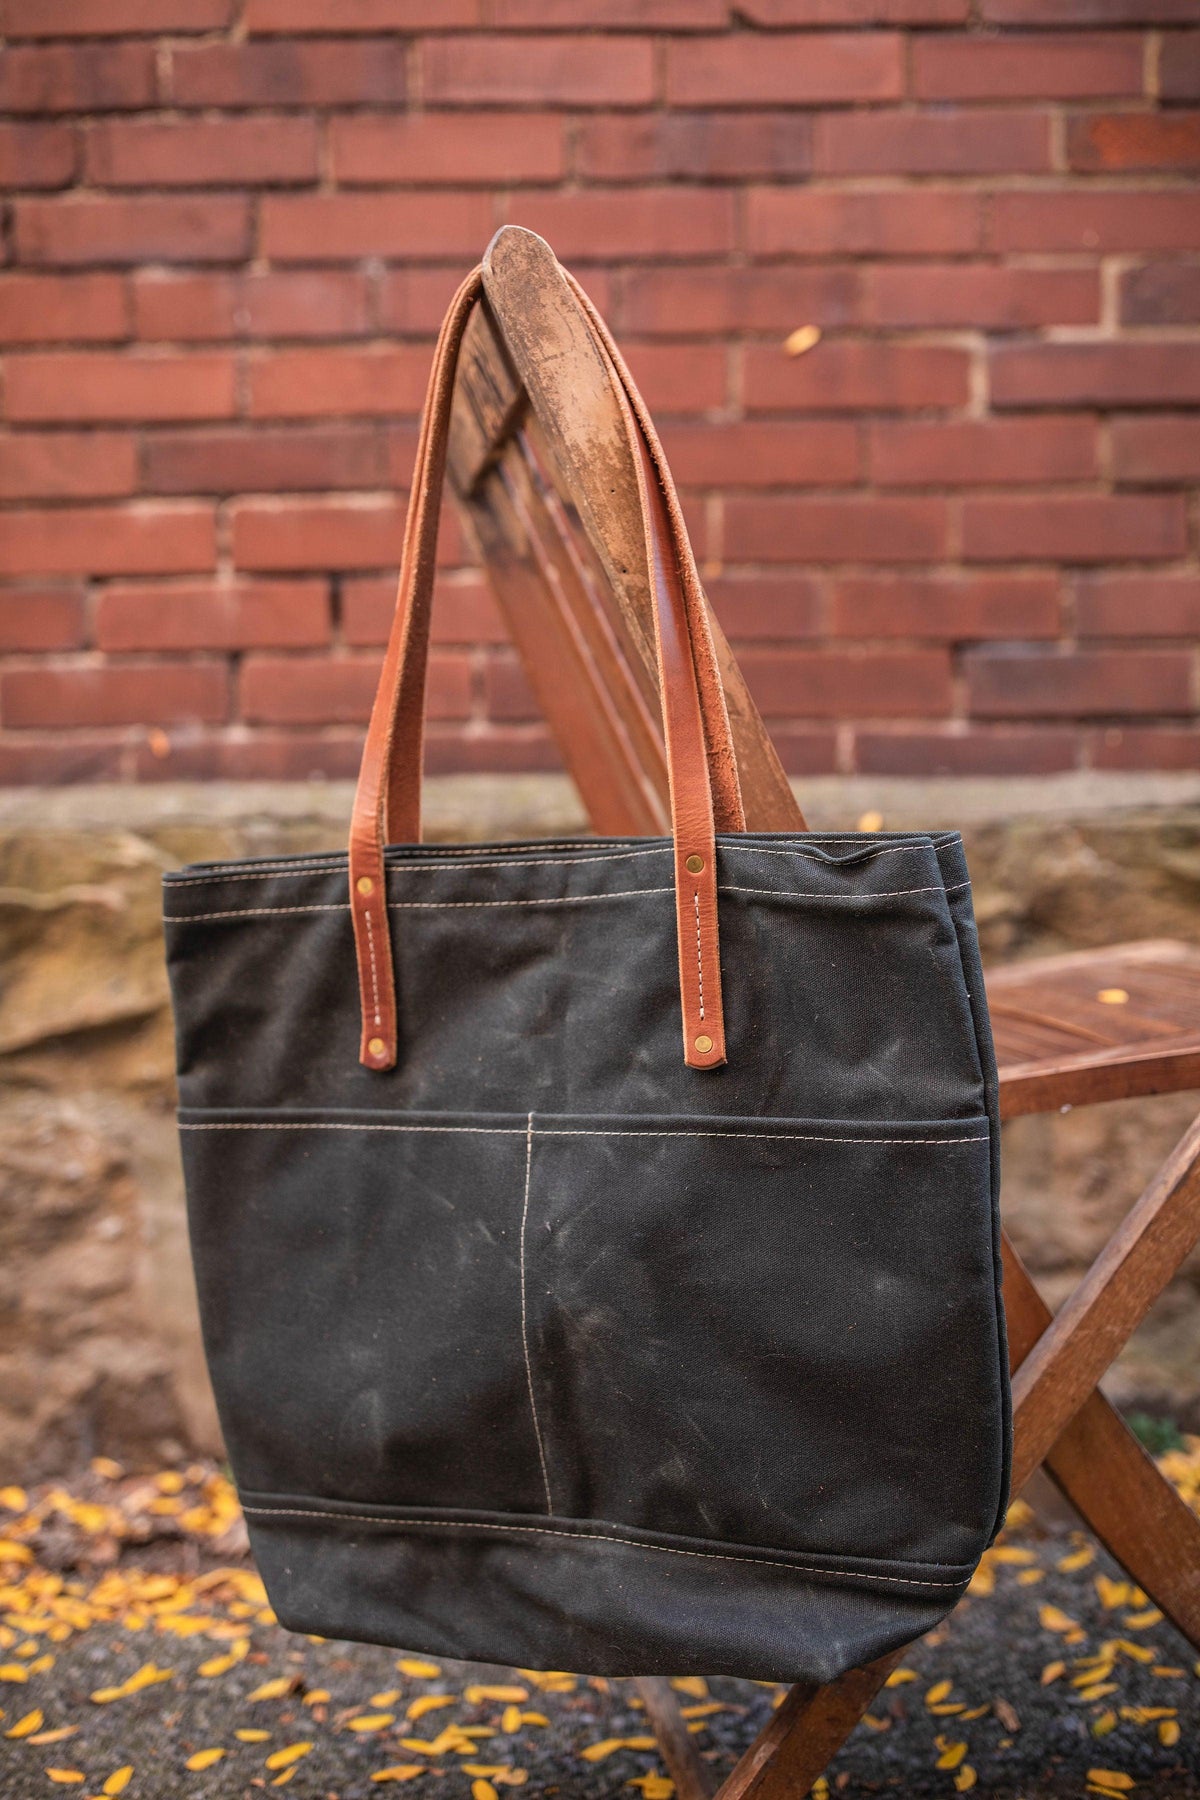 Designing the Waxed Canvas Tote Bag at Rogue Industries